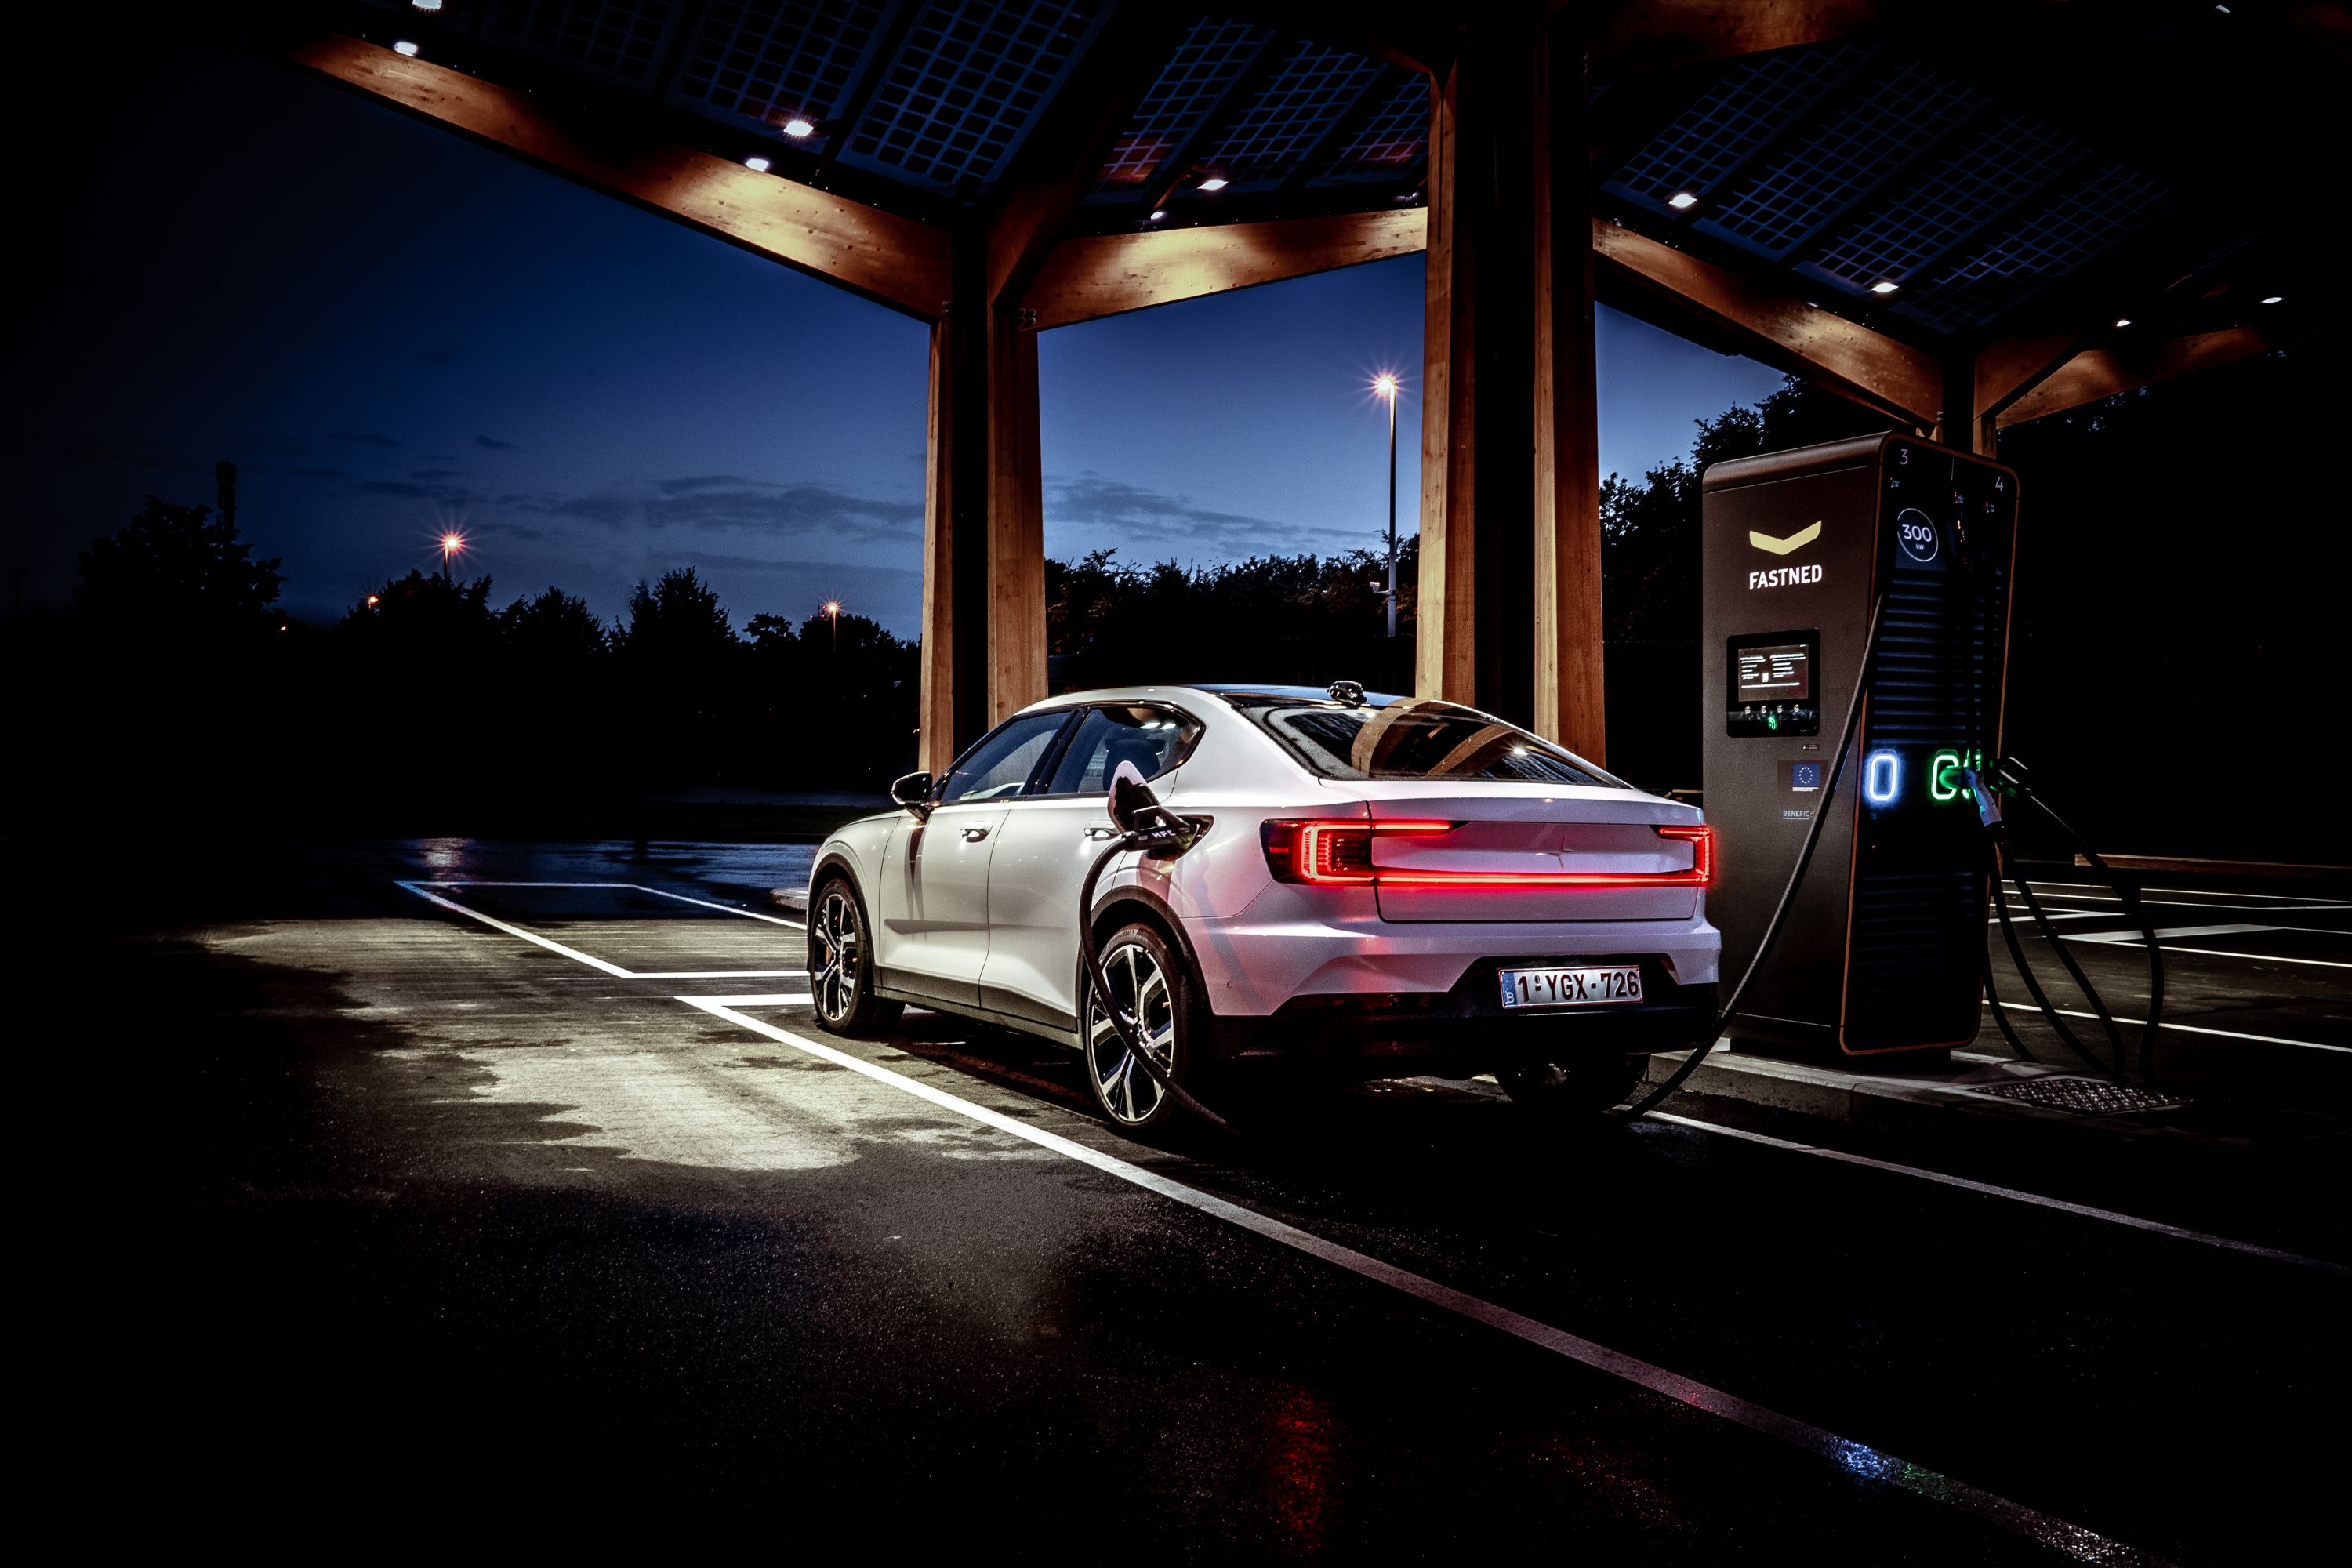 SAE, has partnered with ChargerHelp! and other leaders in EV infrastructure to certify technicians to maintain and troubleshoot EV charging stations.